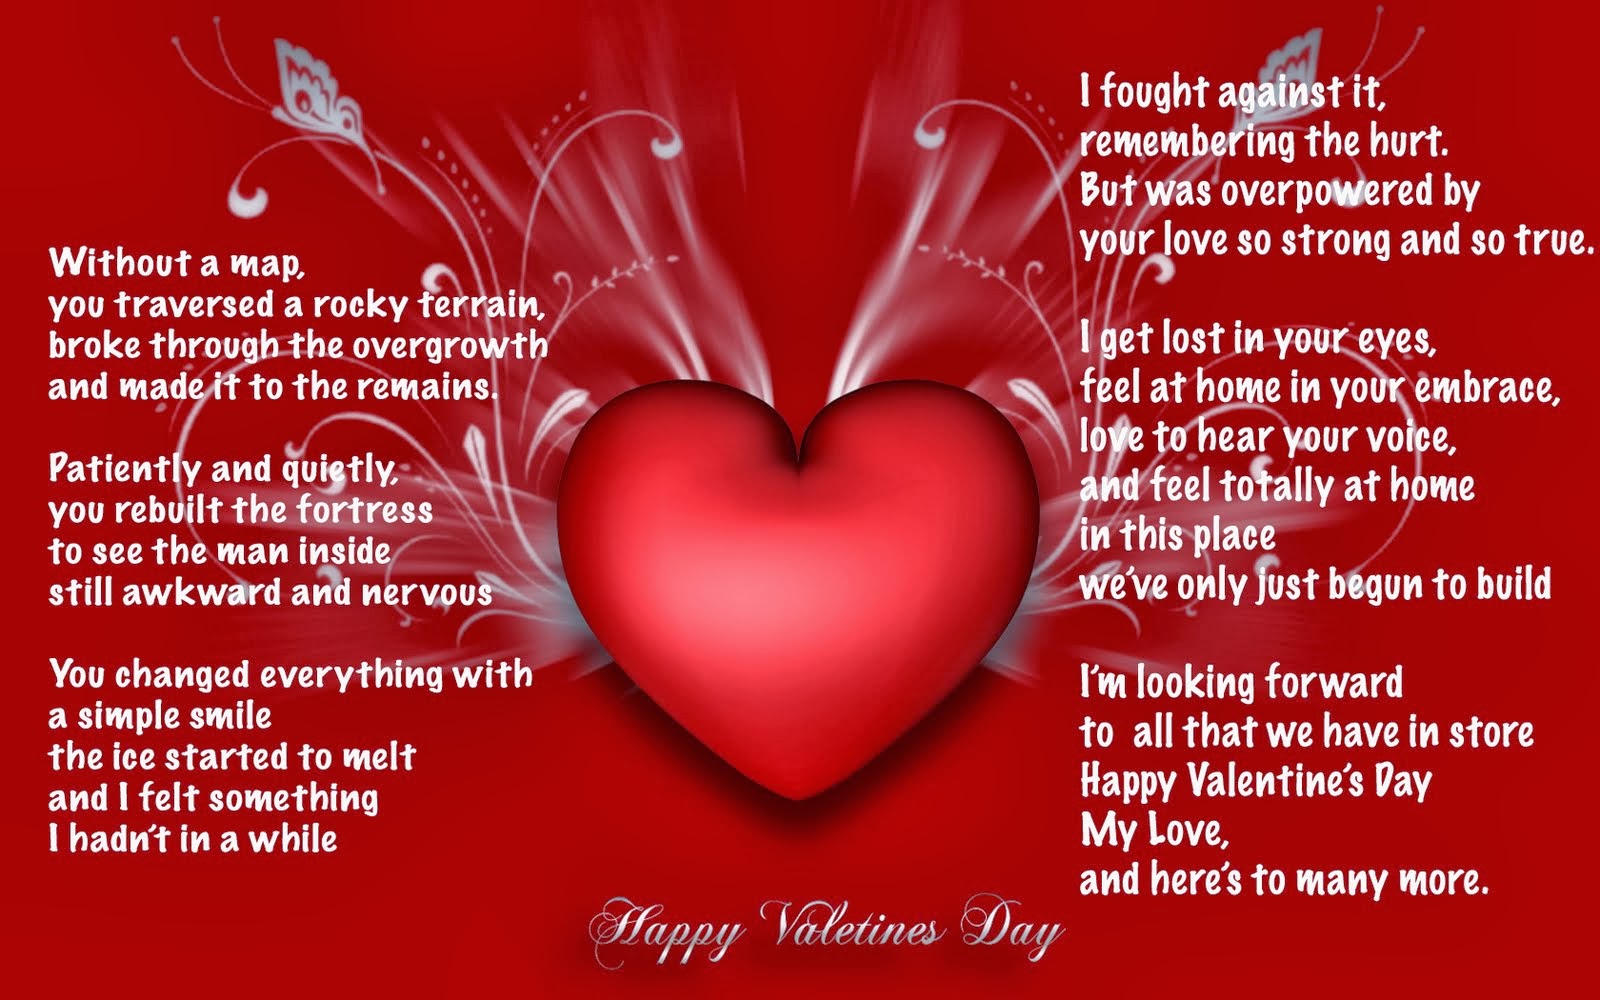 valentines day sayings 2015 funny valentines day sayings here i